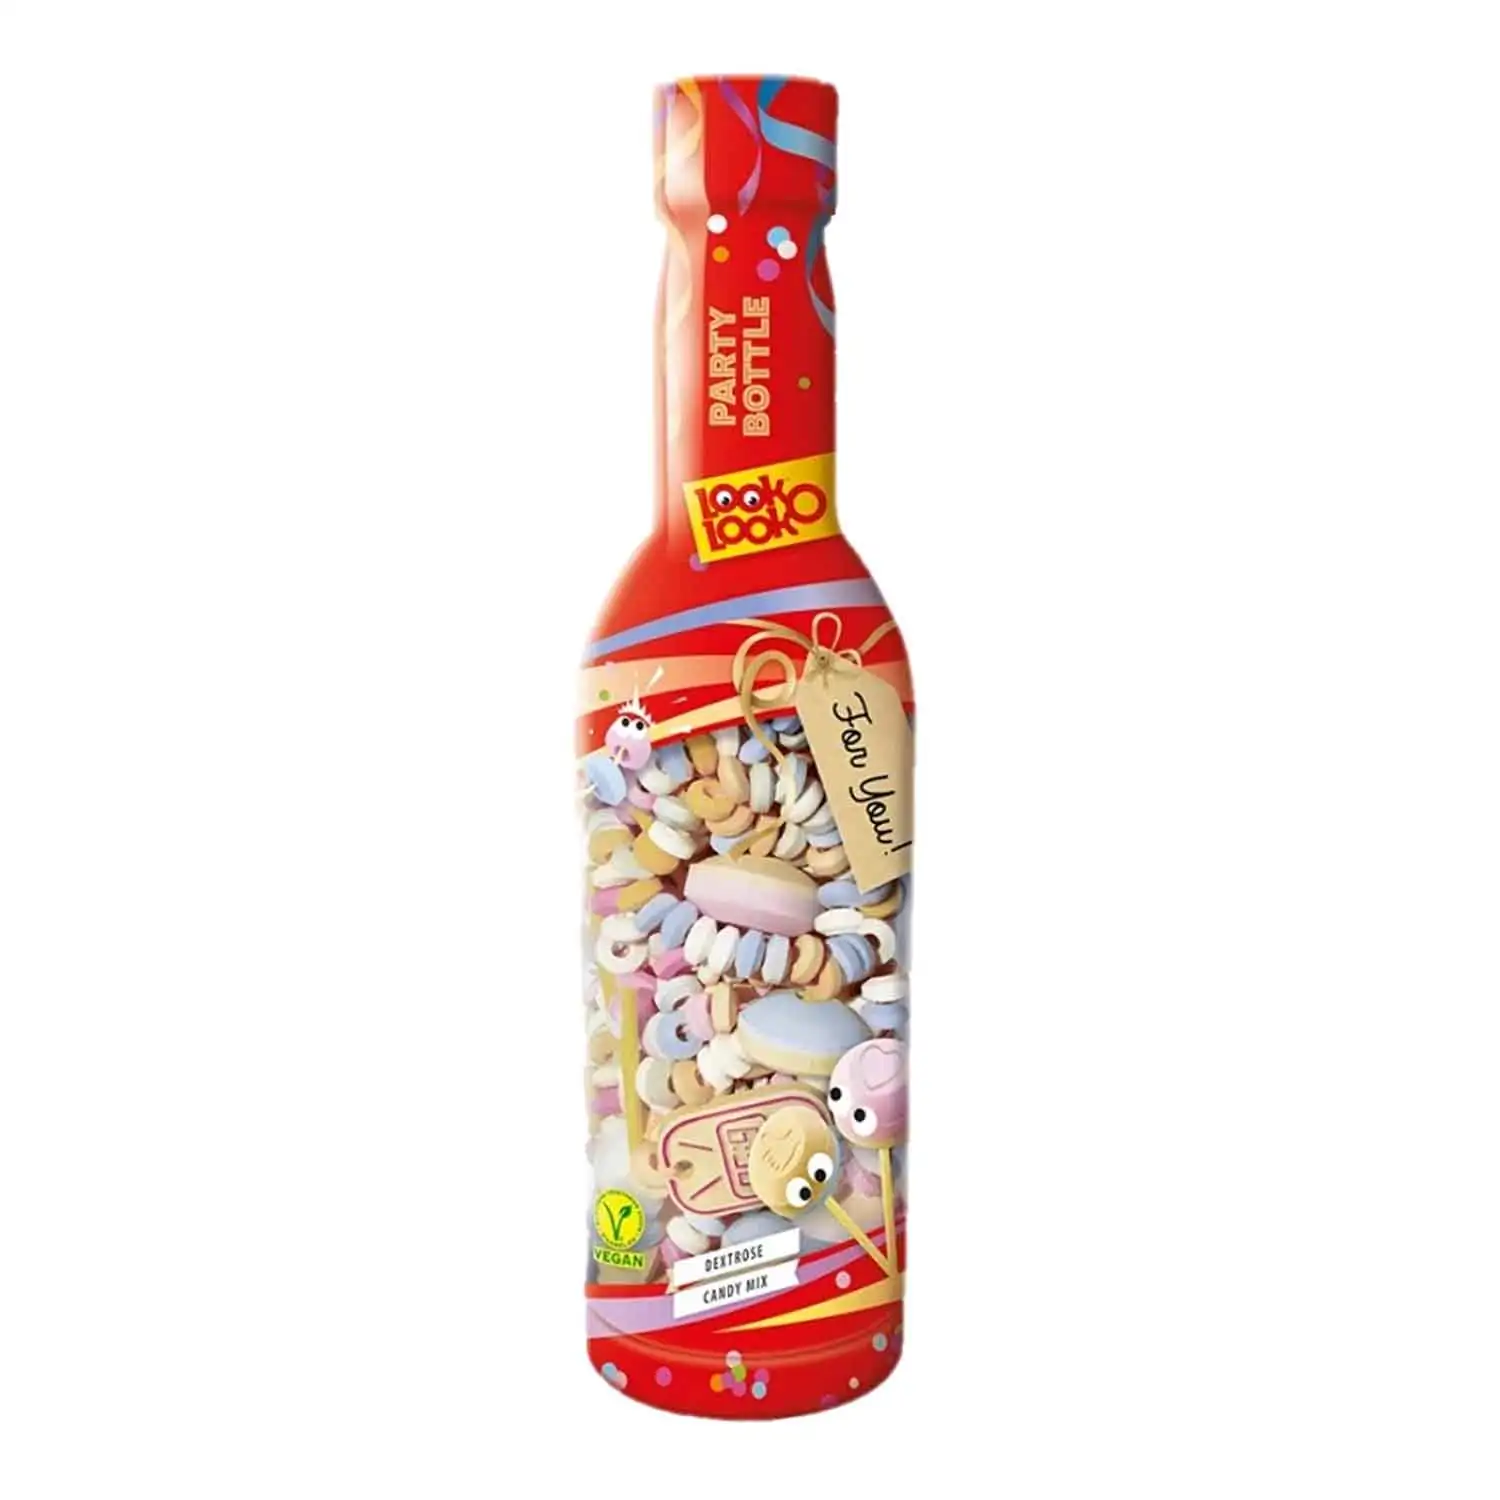 LOL bouteille party 325g - Buy at Real Tobacco